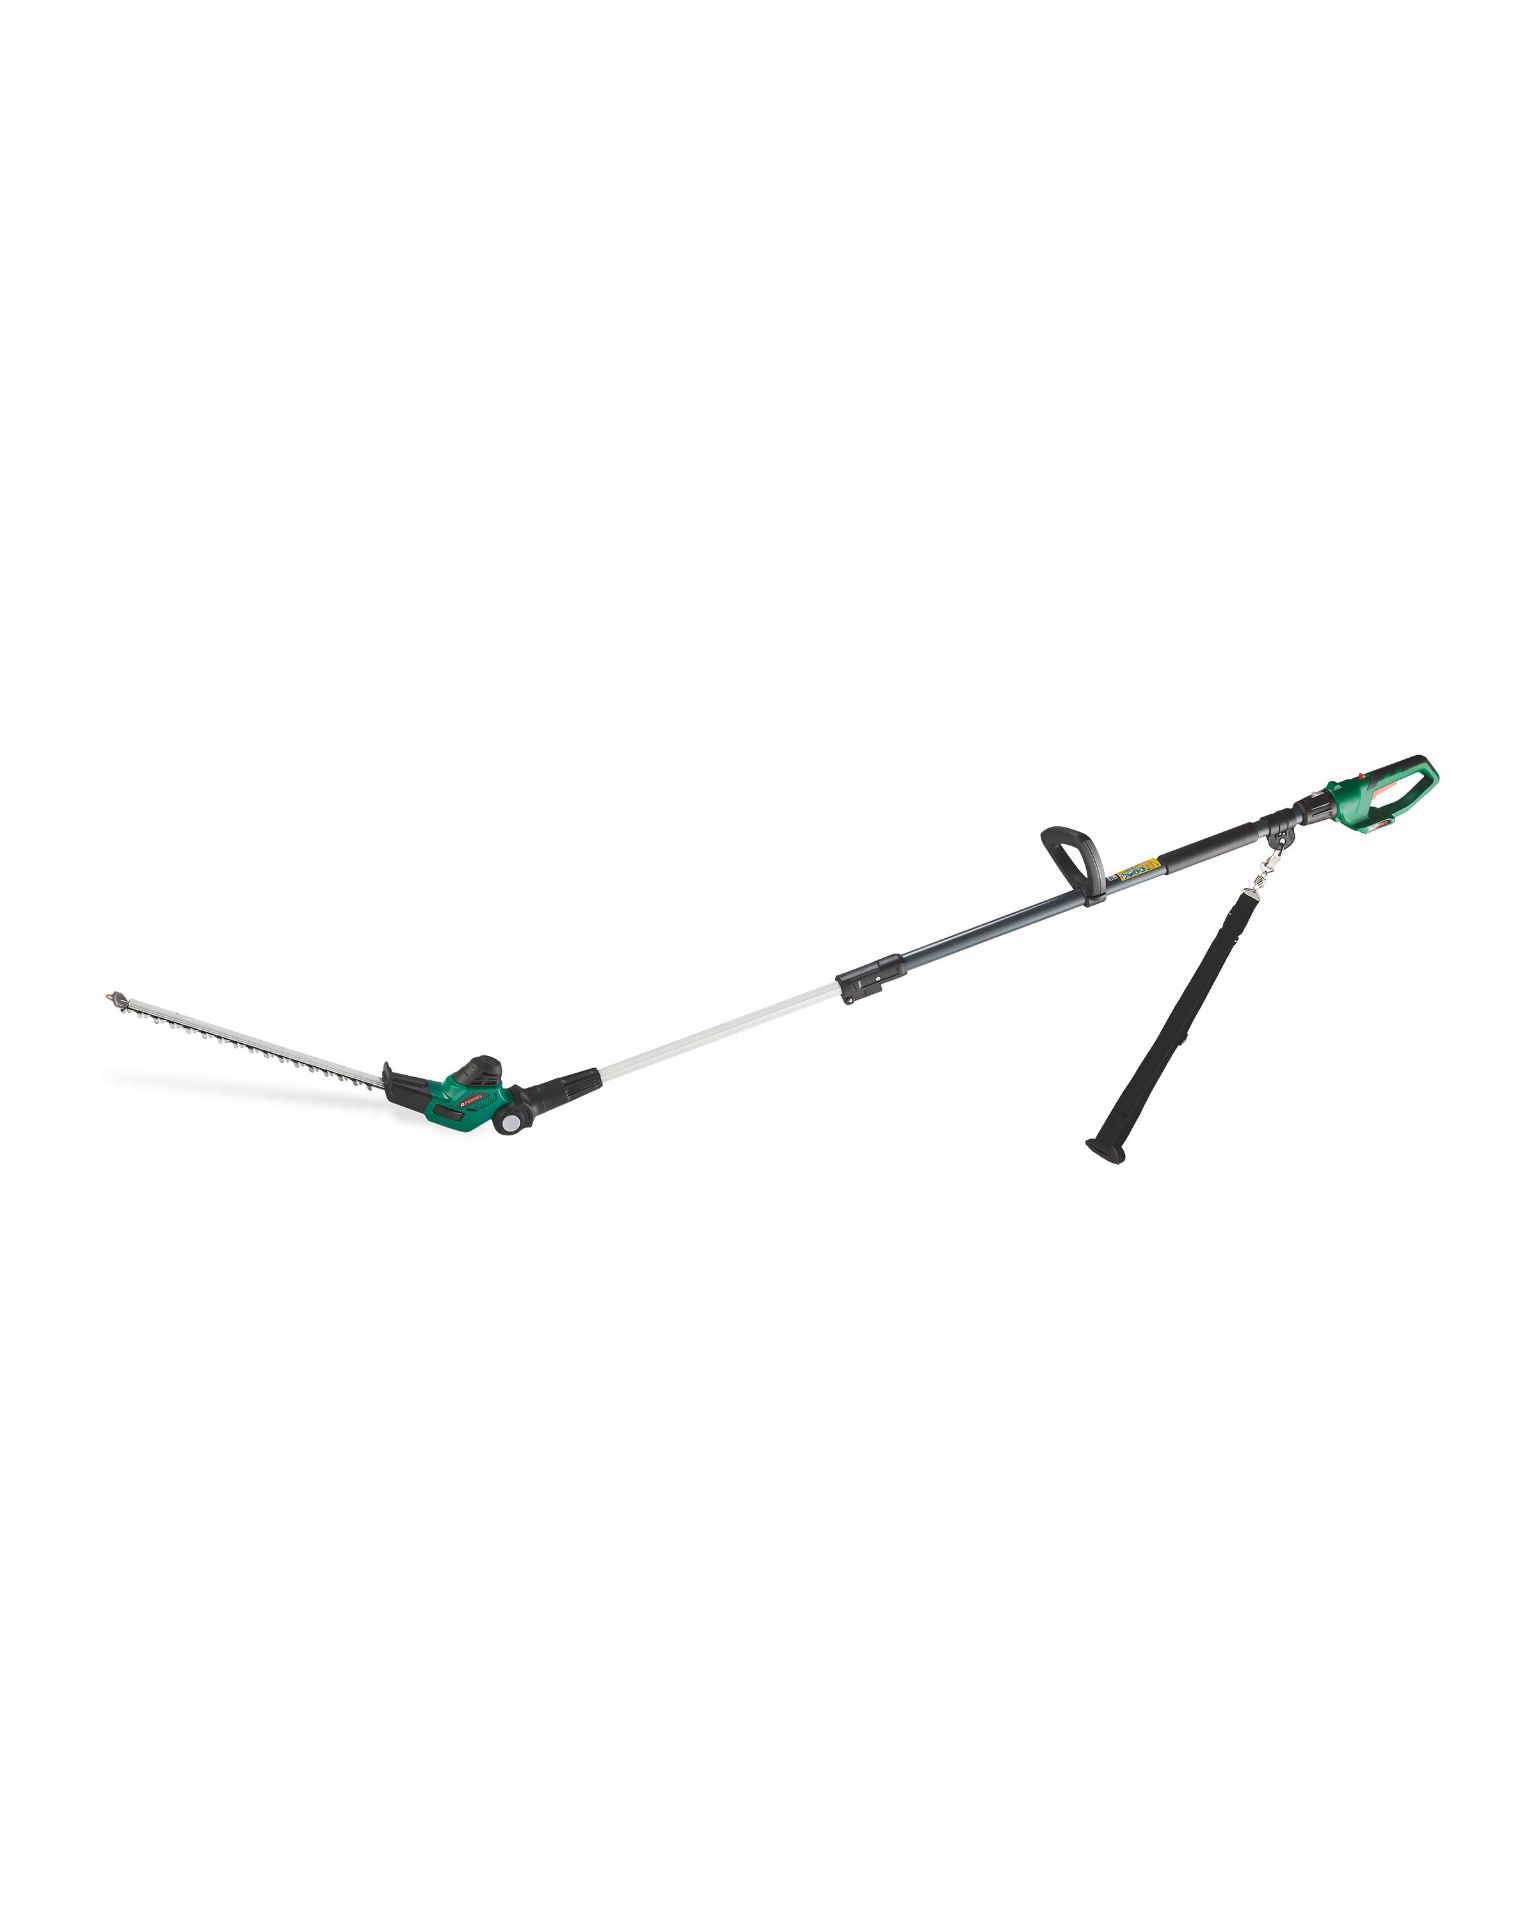 Boxed Ferrex 40V Lithium Iron Cordless Telescopic Hedge Trimmer RRP £40 (Public Viewing and